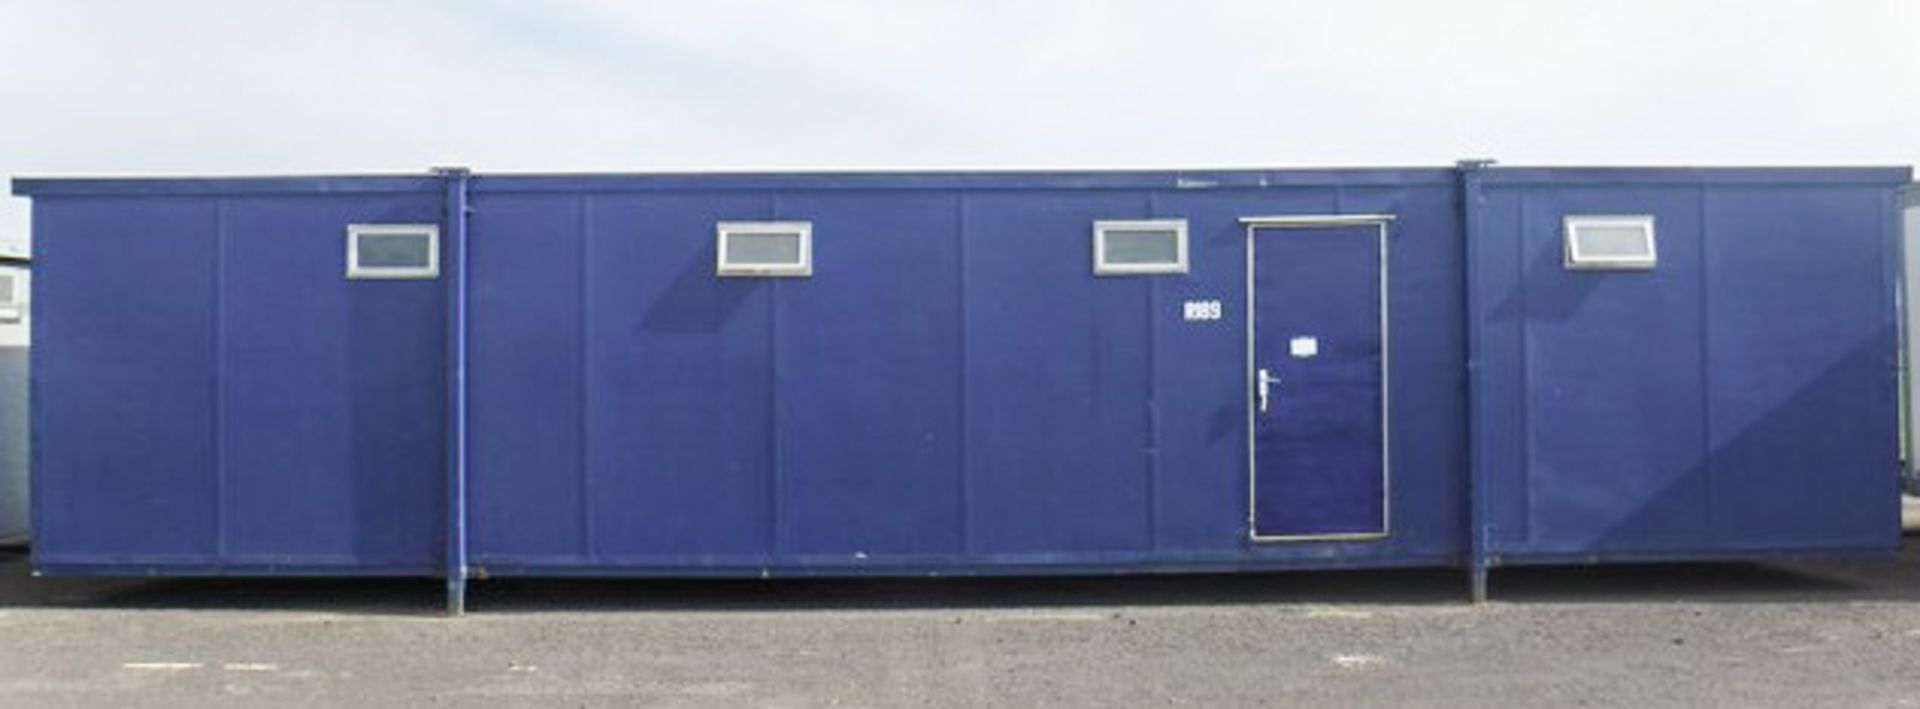 40ft x 10ft toilet block, c/w 10 cubicals, 10 urinals, 9 sinks, water heaters temp controlled anti-f